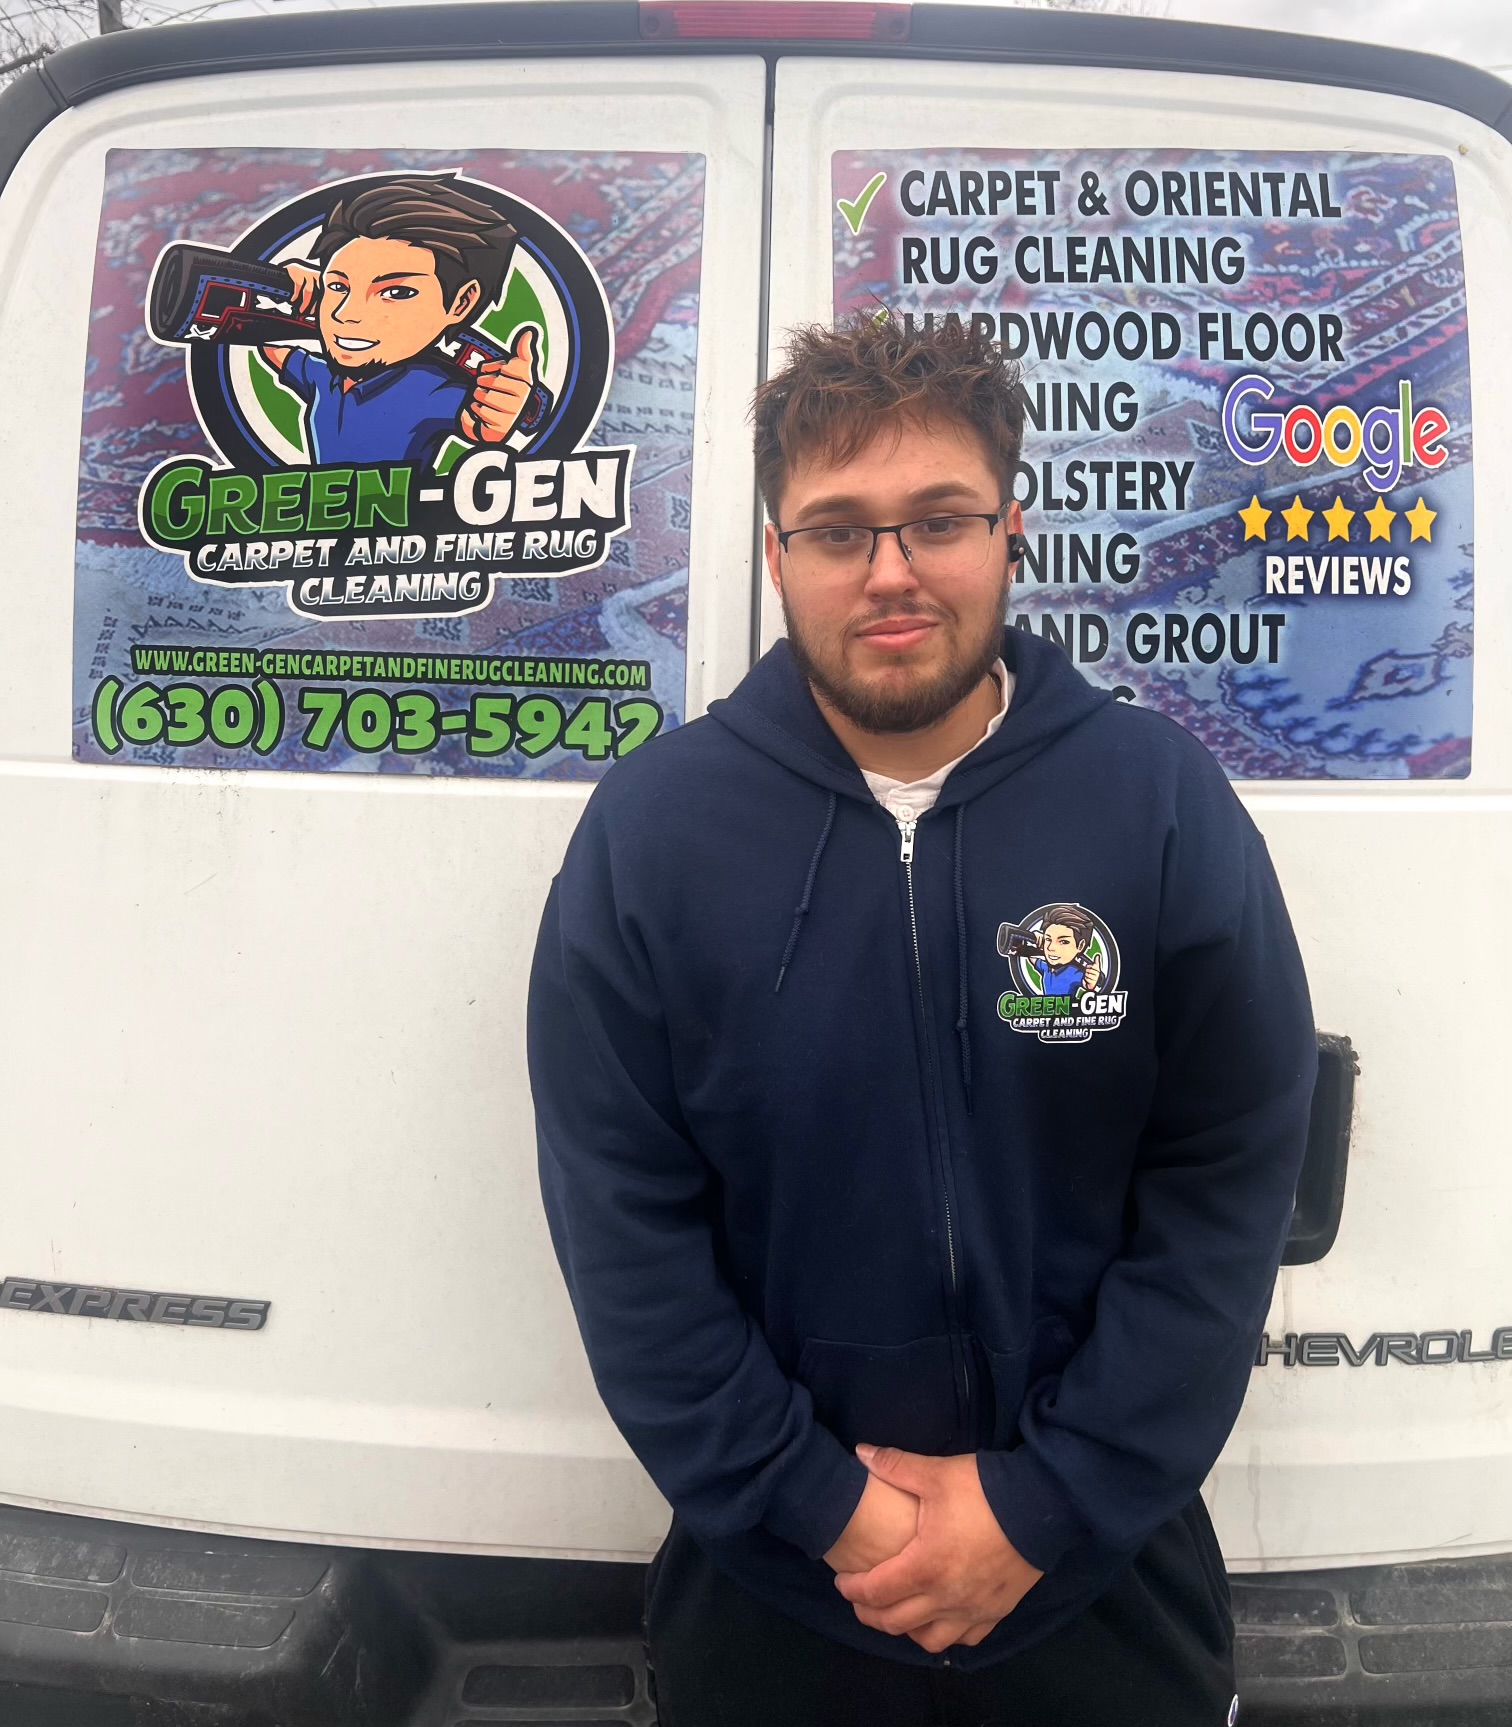 Tony, owner of Green-Gen Carpet and fine rug cleaning